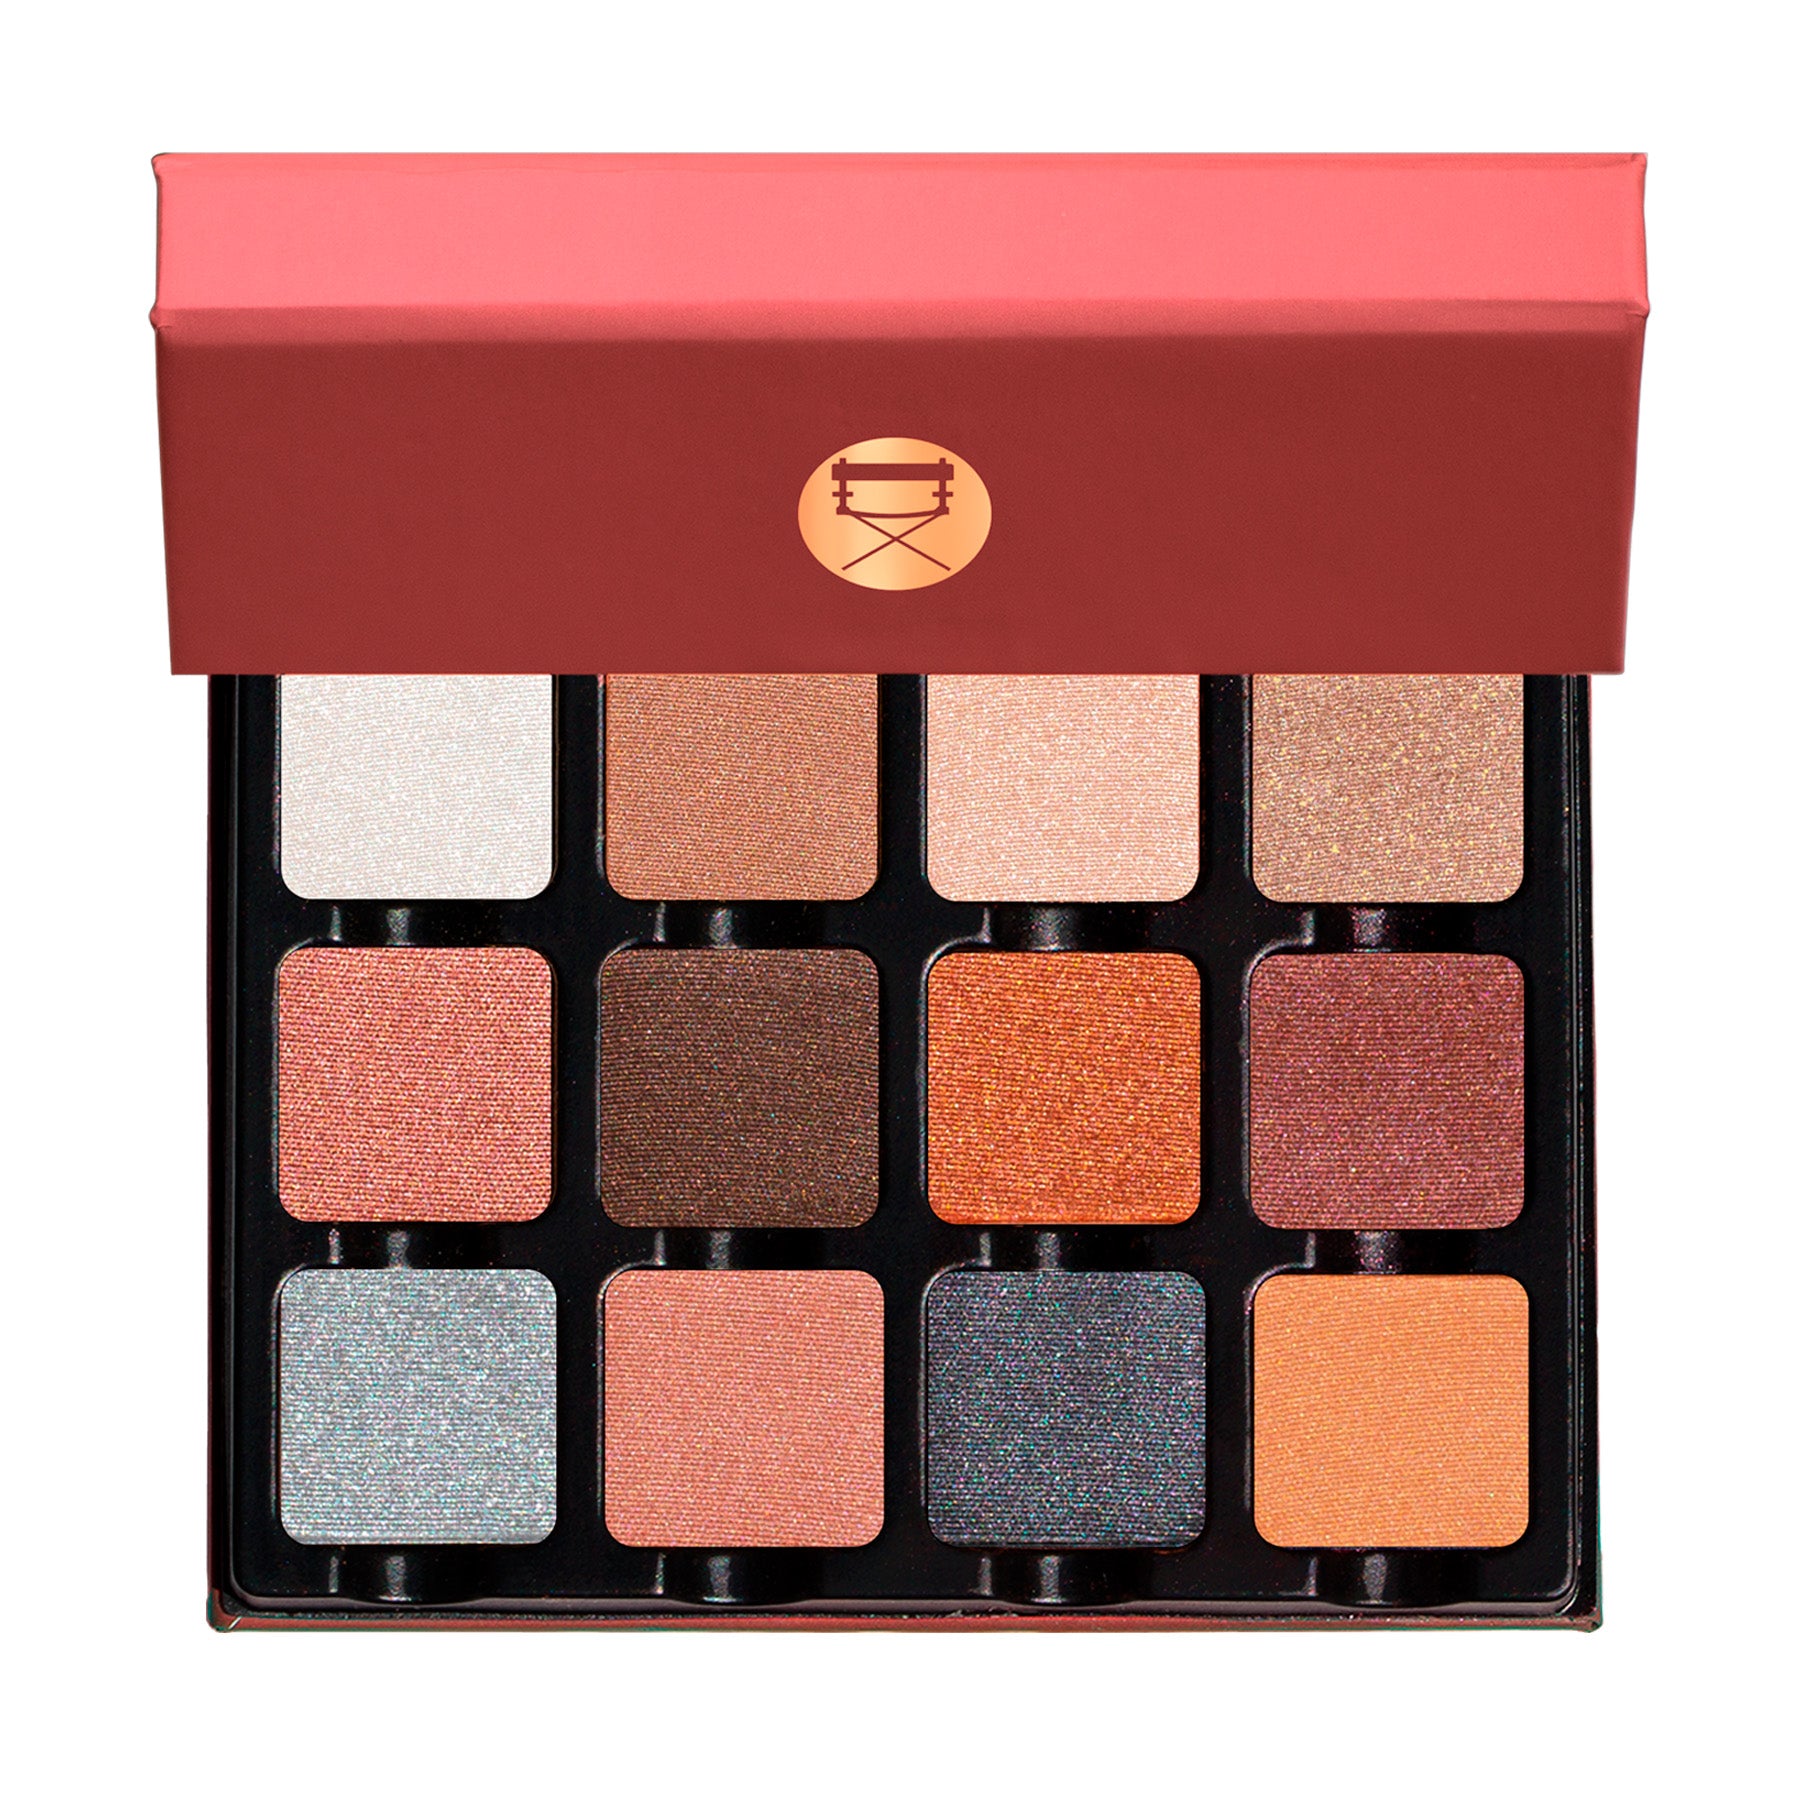 Viseart Paris Petites Shimmers Sultry Muse Eyeshadow Palette